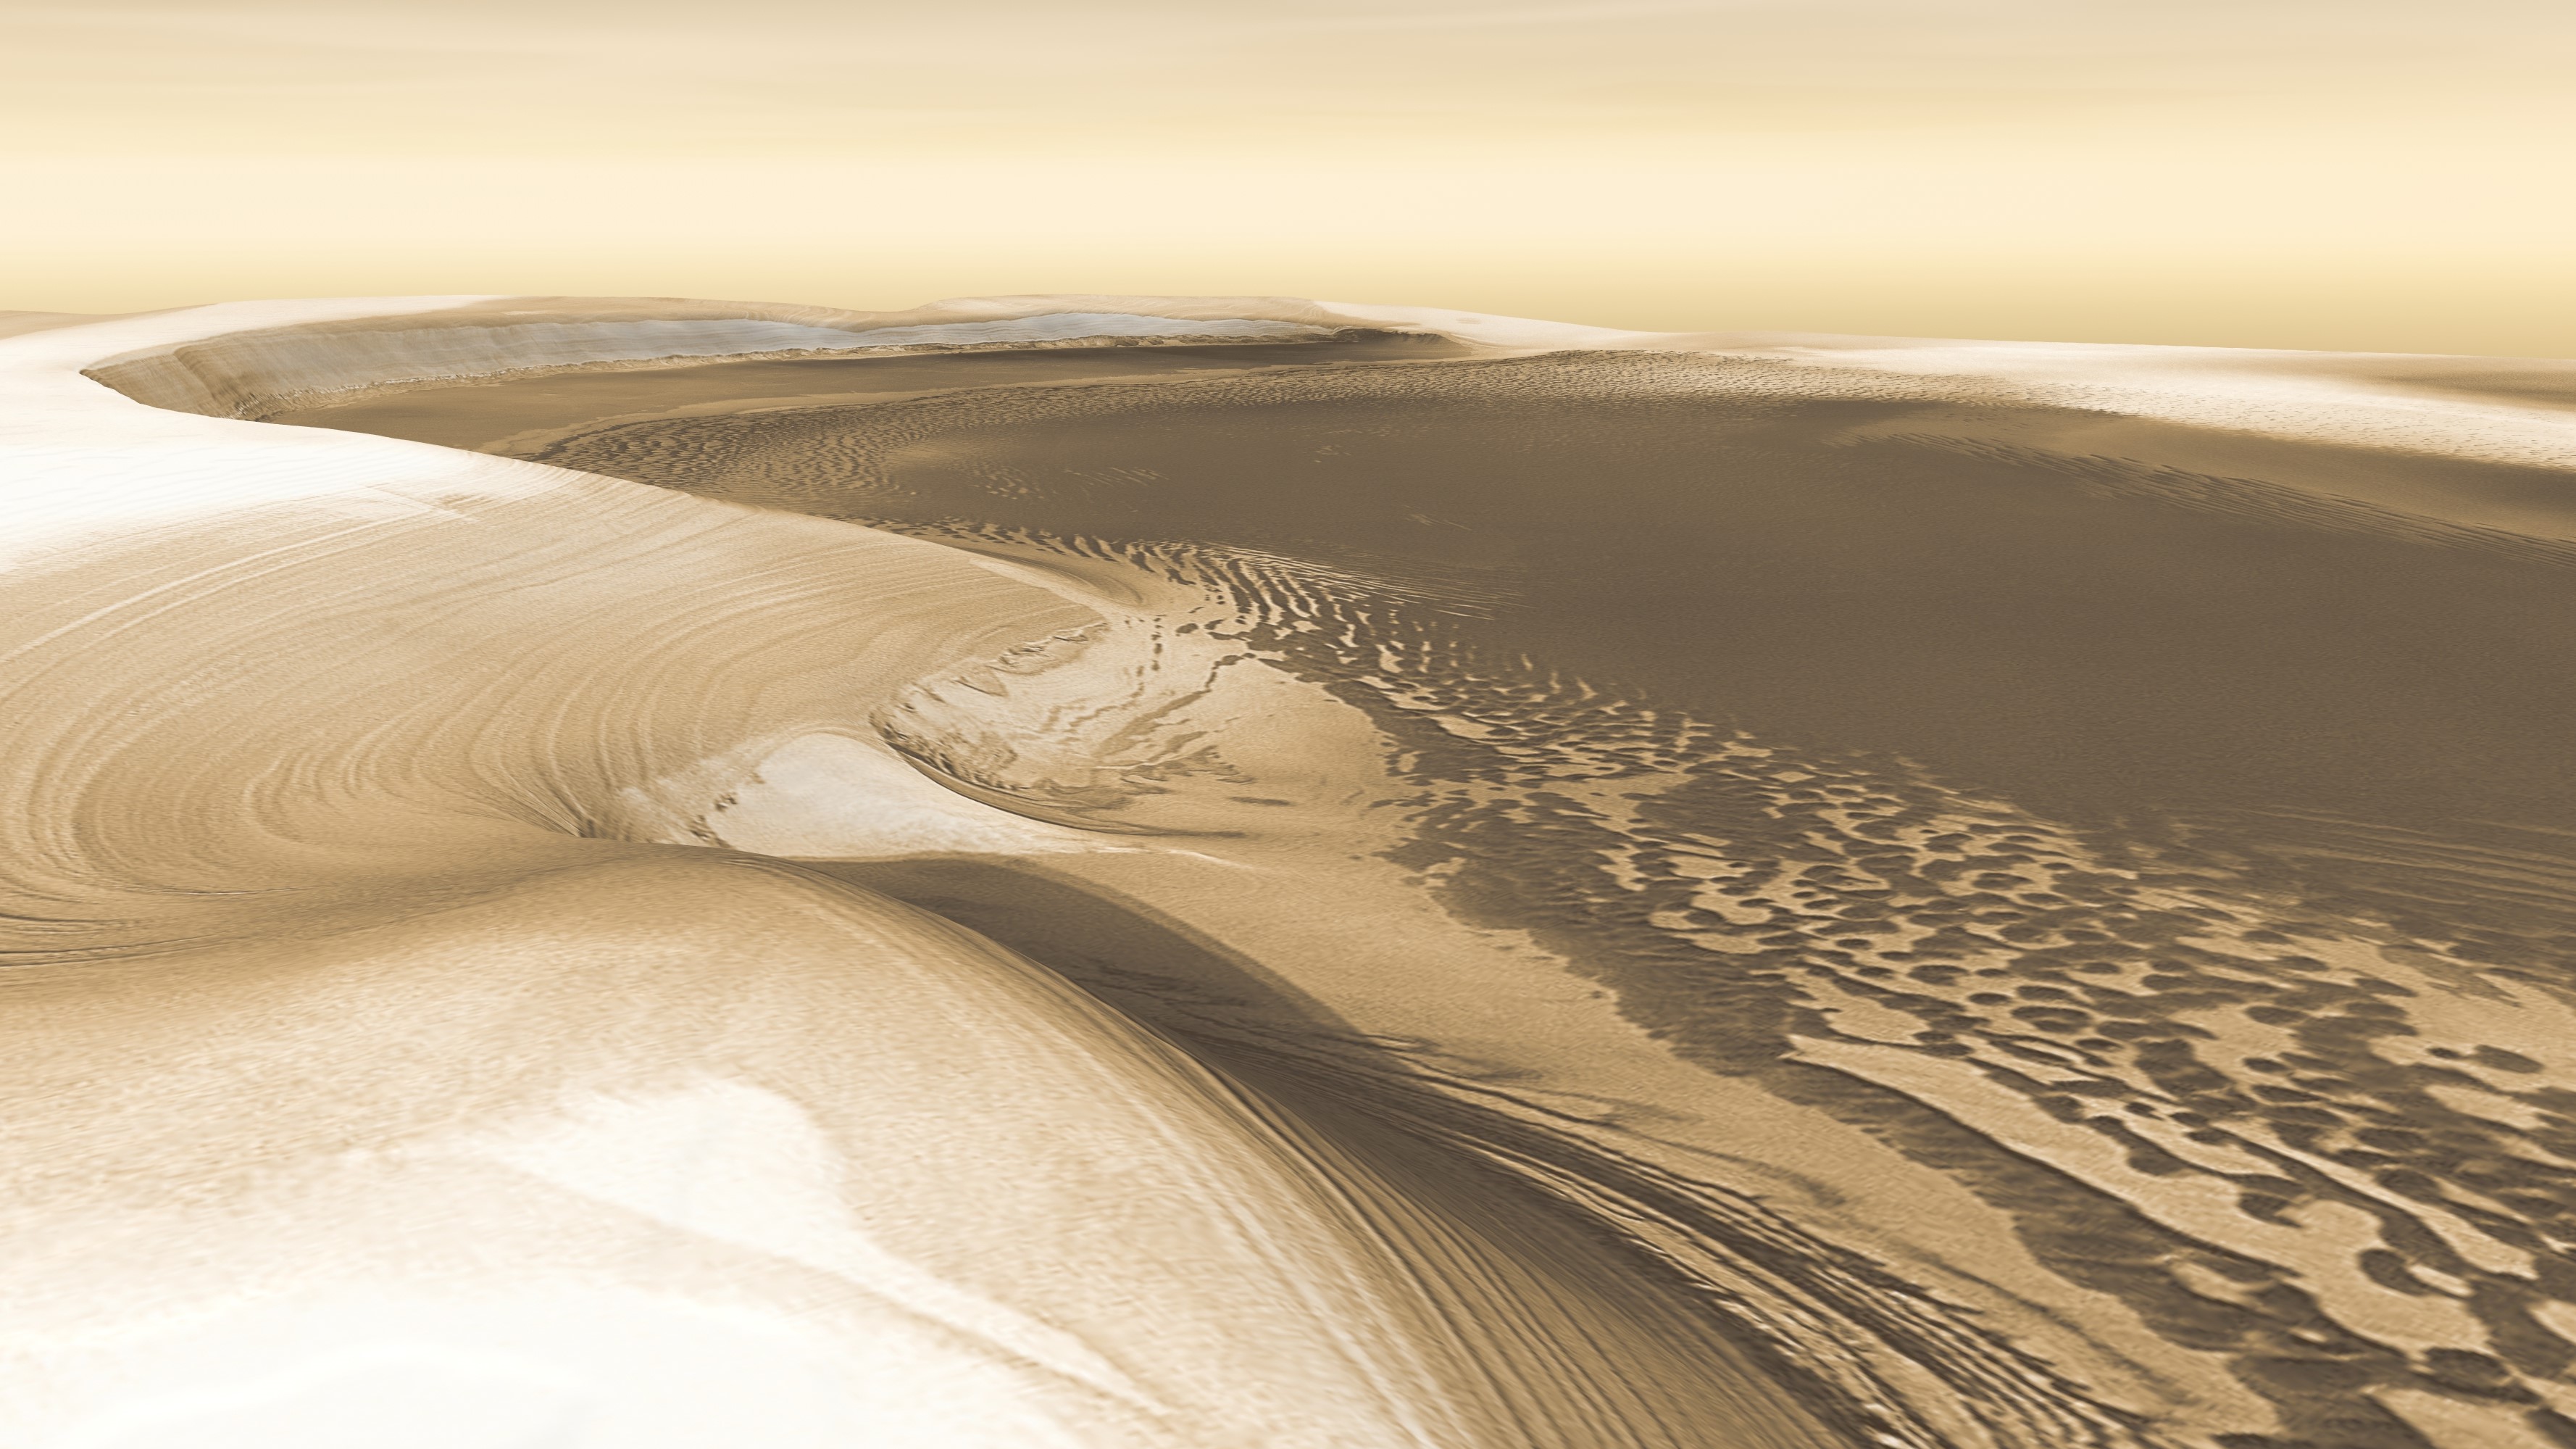 Simulated 3D perspective view of Mars polar cap.